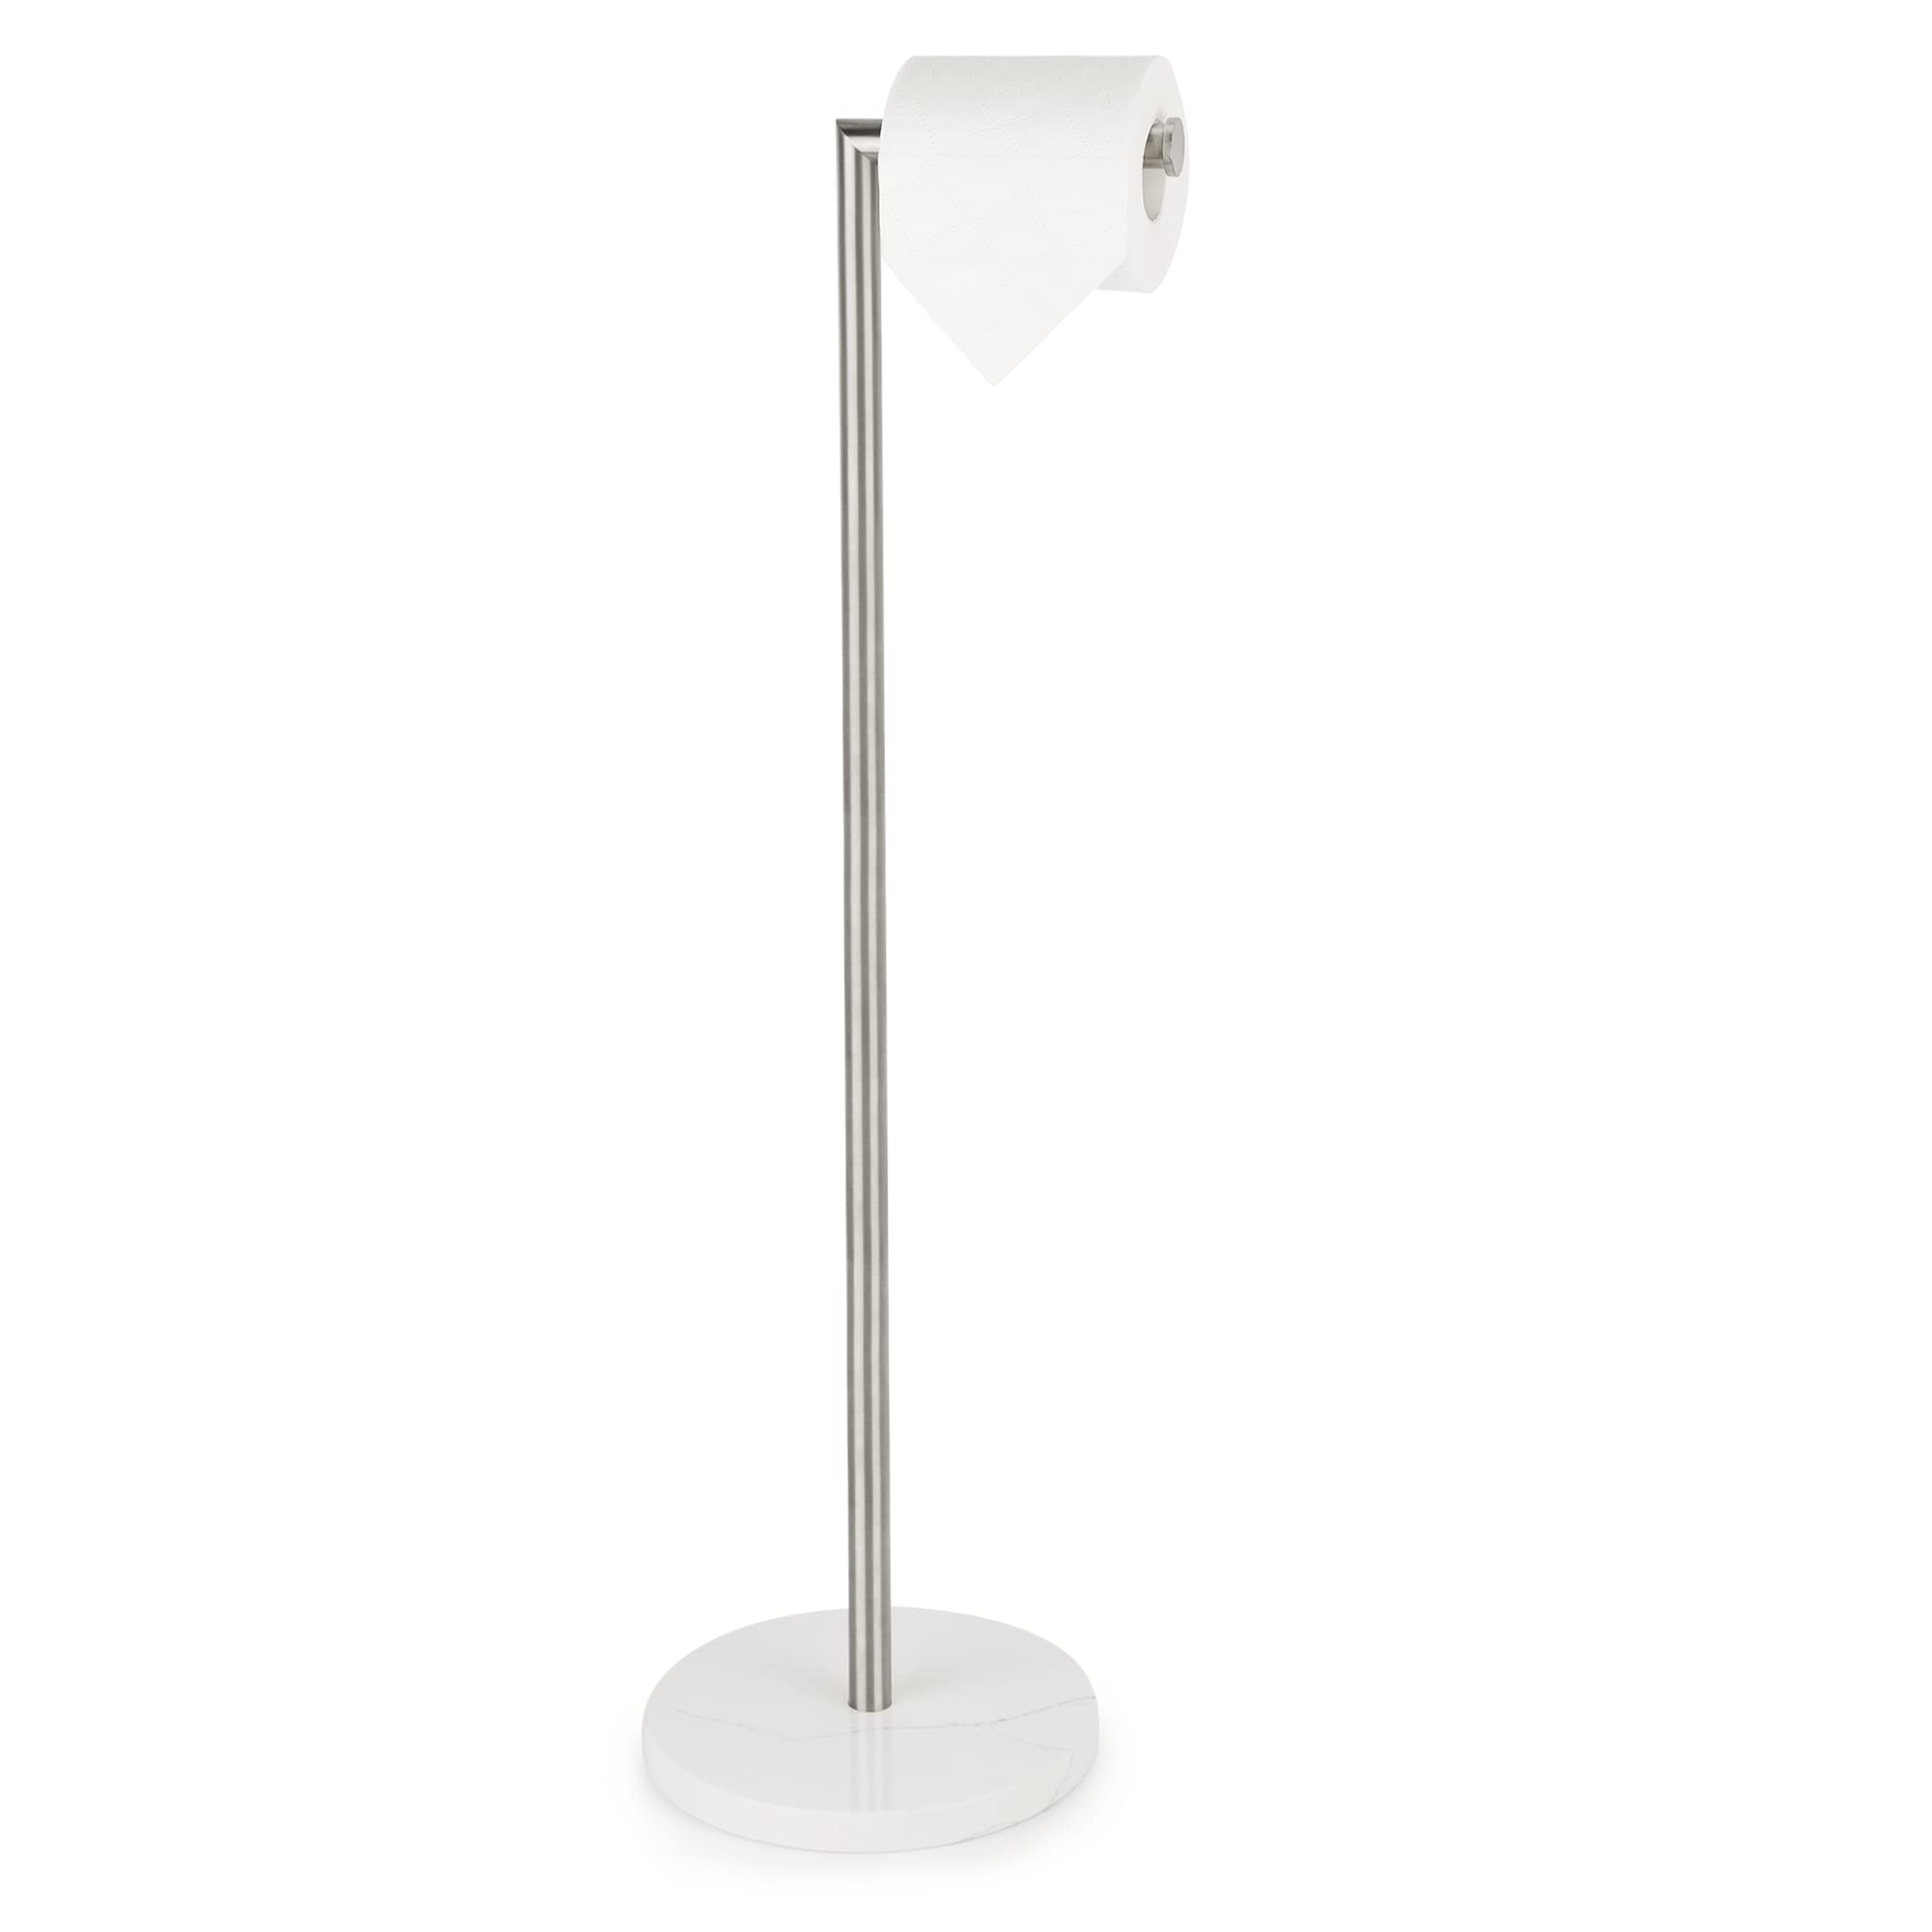 Standing Toilet Paper Holder丨Holder Stand with Modern Marble Base